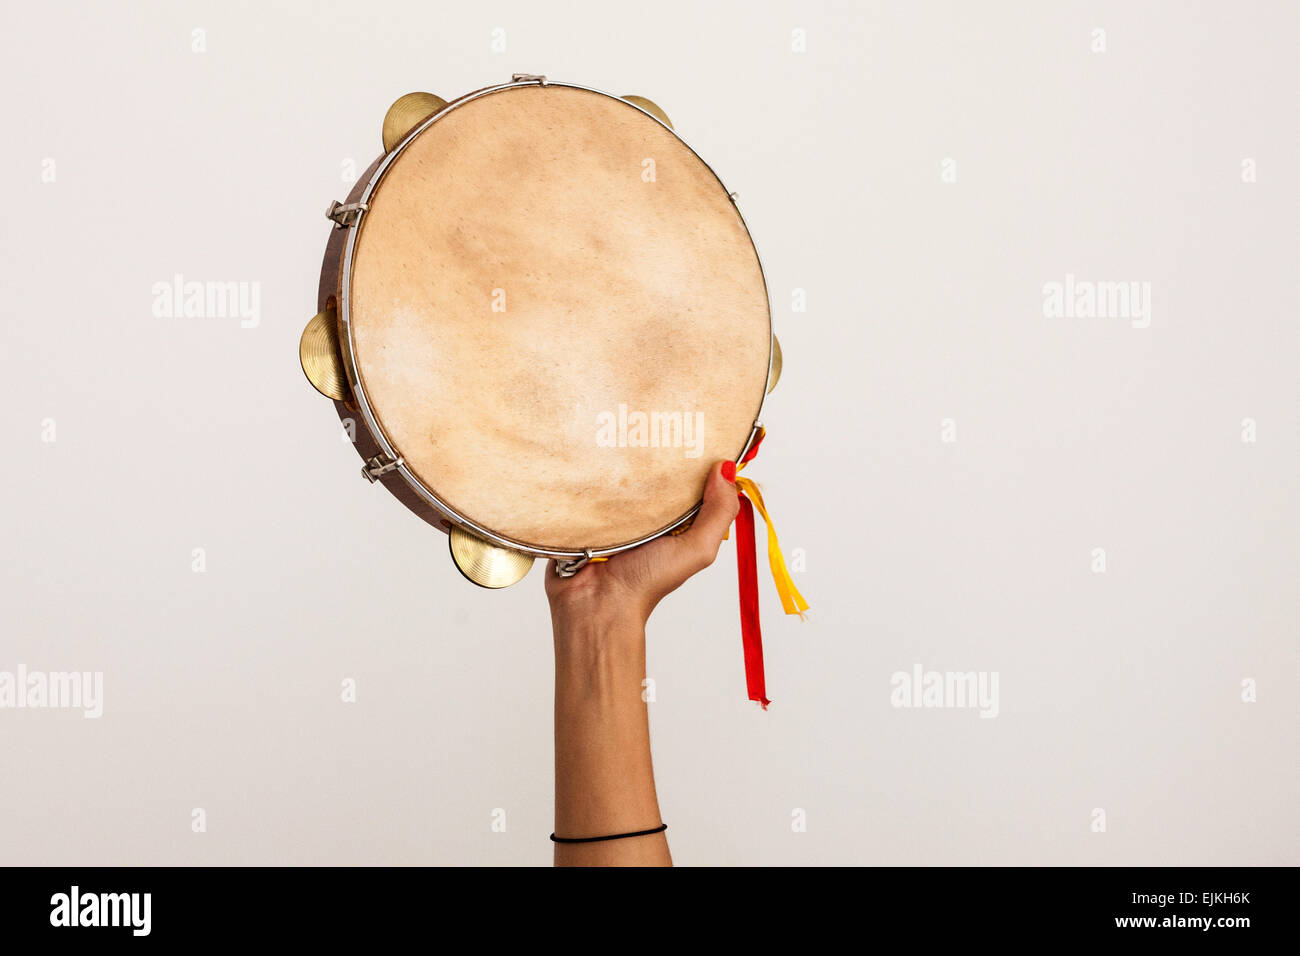 Hand holding tambourine with yellow and red ribbons on white background Stock Photo